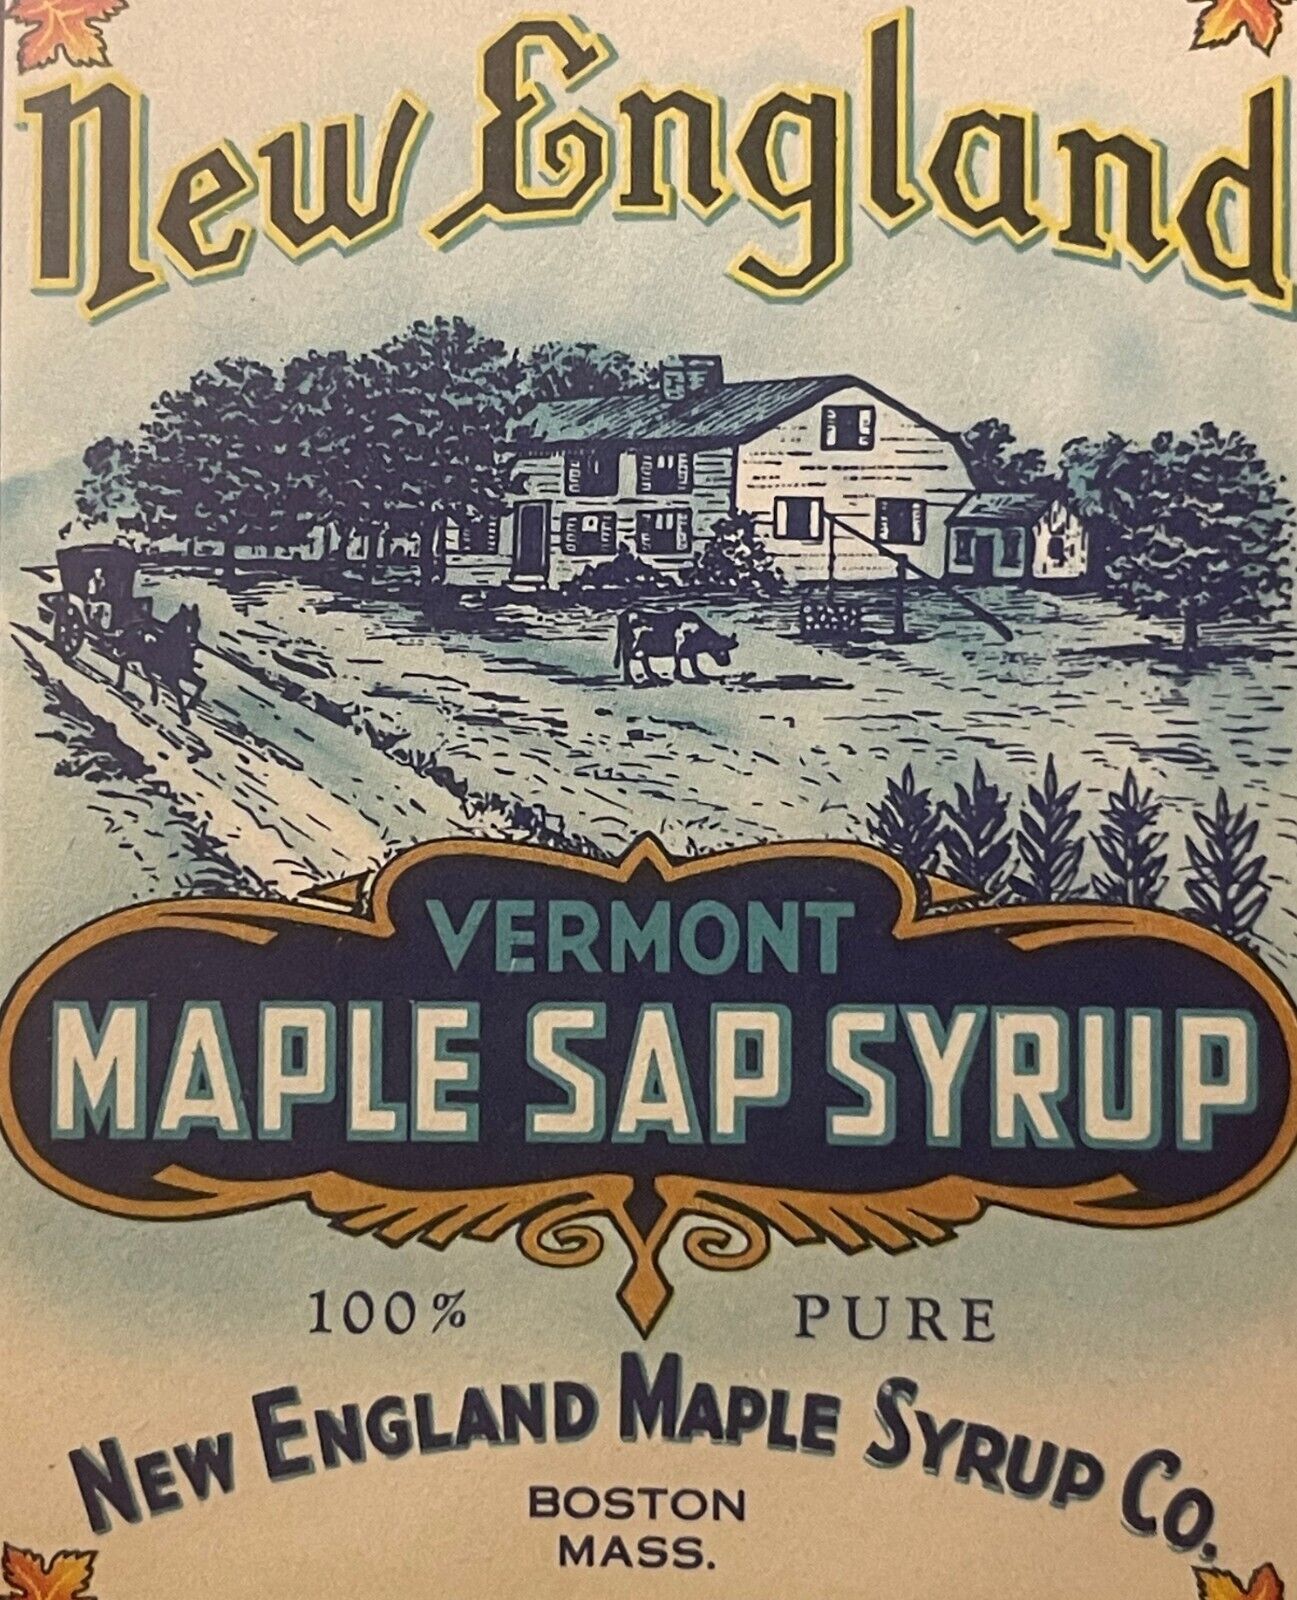 Rare Antique Large New England Vermont Maple Syrup Label, Boston, MA 1910s